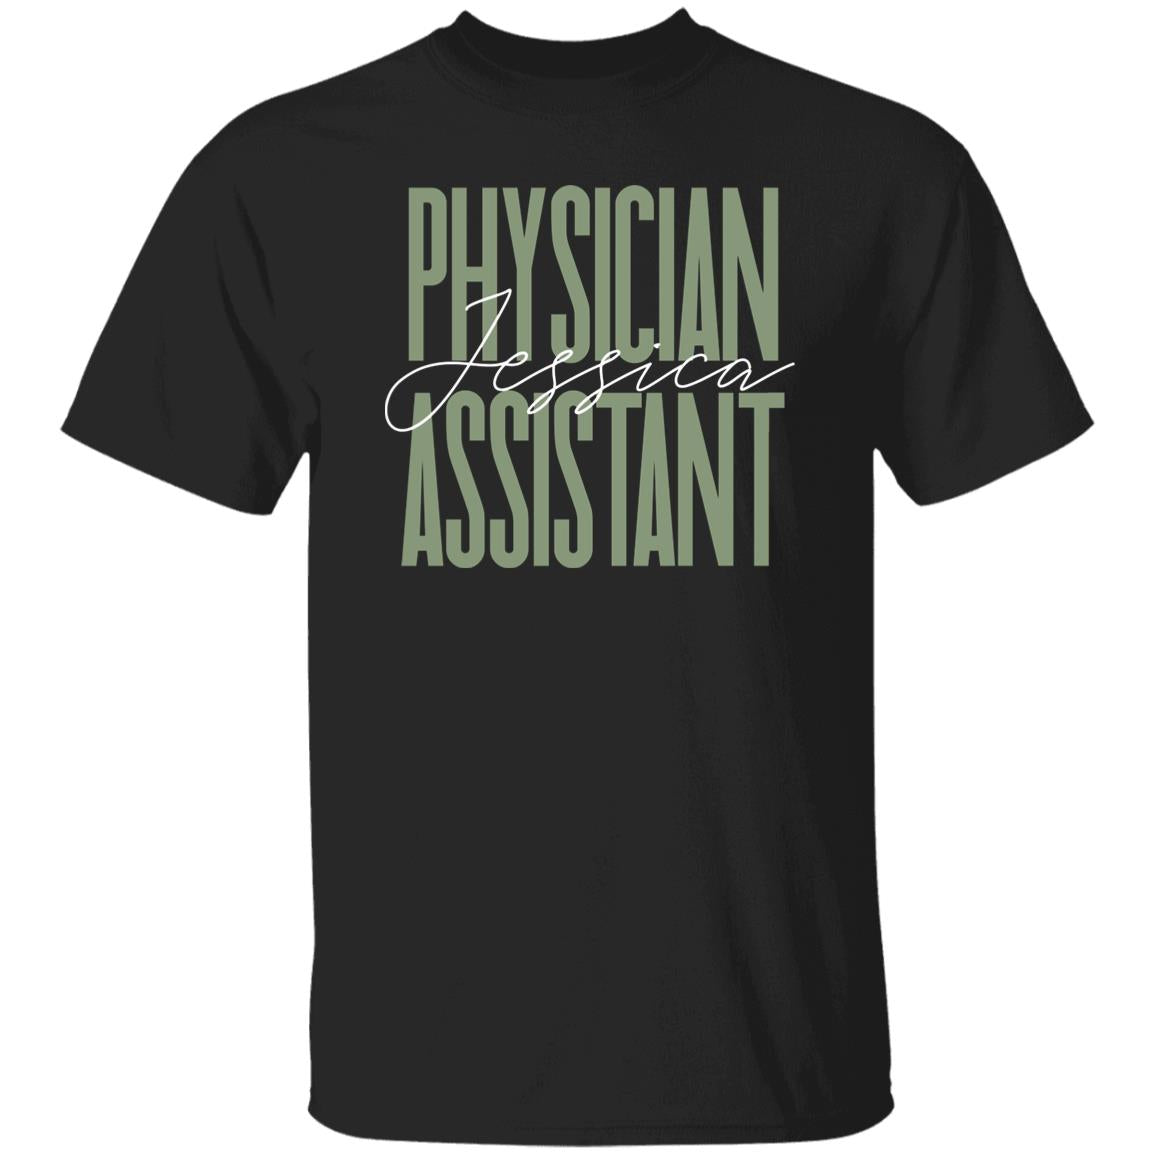 Physician assistant T-Shirt gift Doctor Assistant Customized Unisex tee Black Navy Dark Heather-Family-Gift-Planet